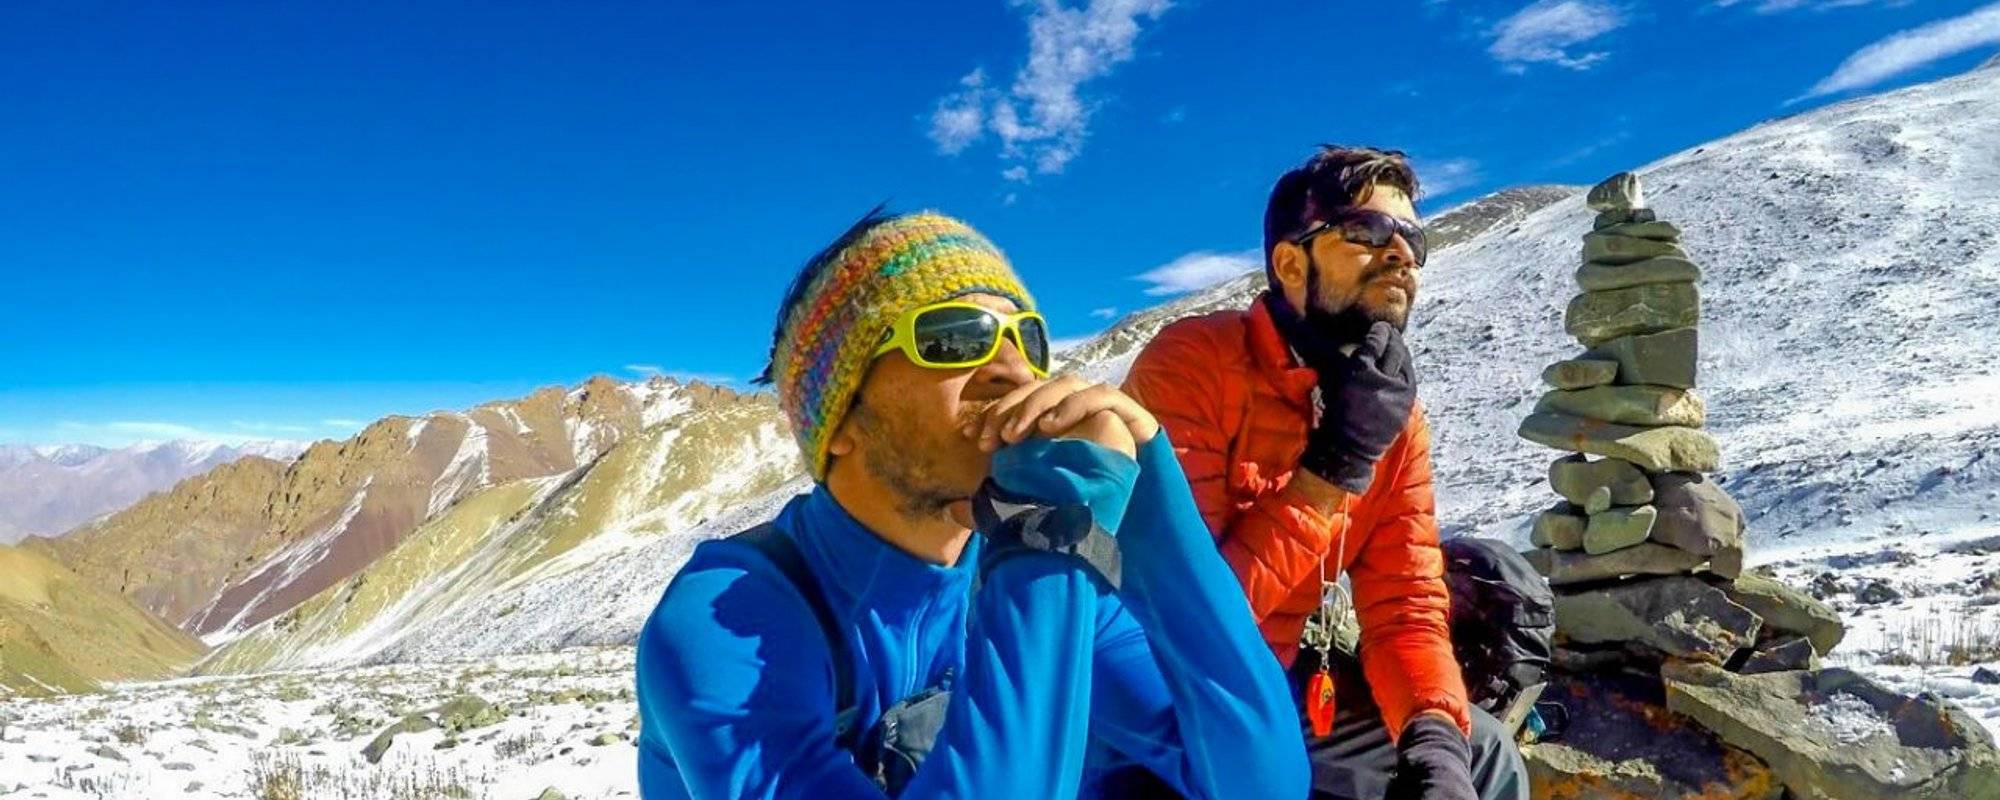 From A Fan To Brothers - My Journey With Mountaineer Arjun Vajpai